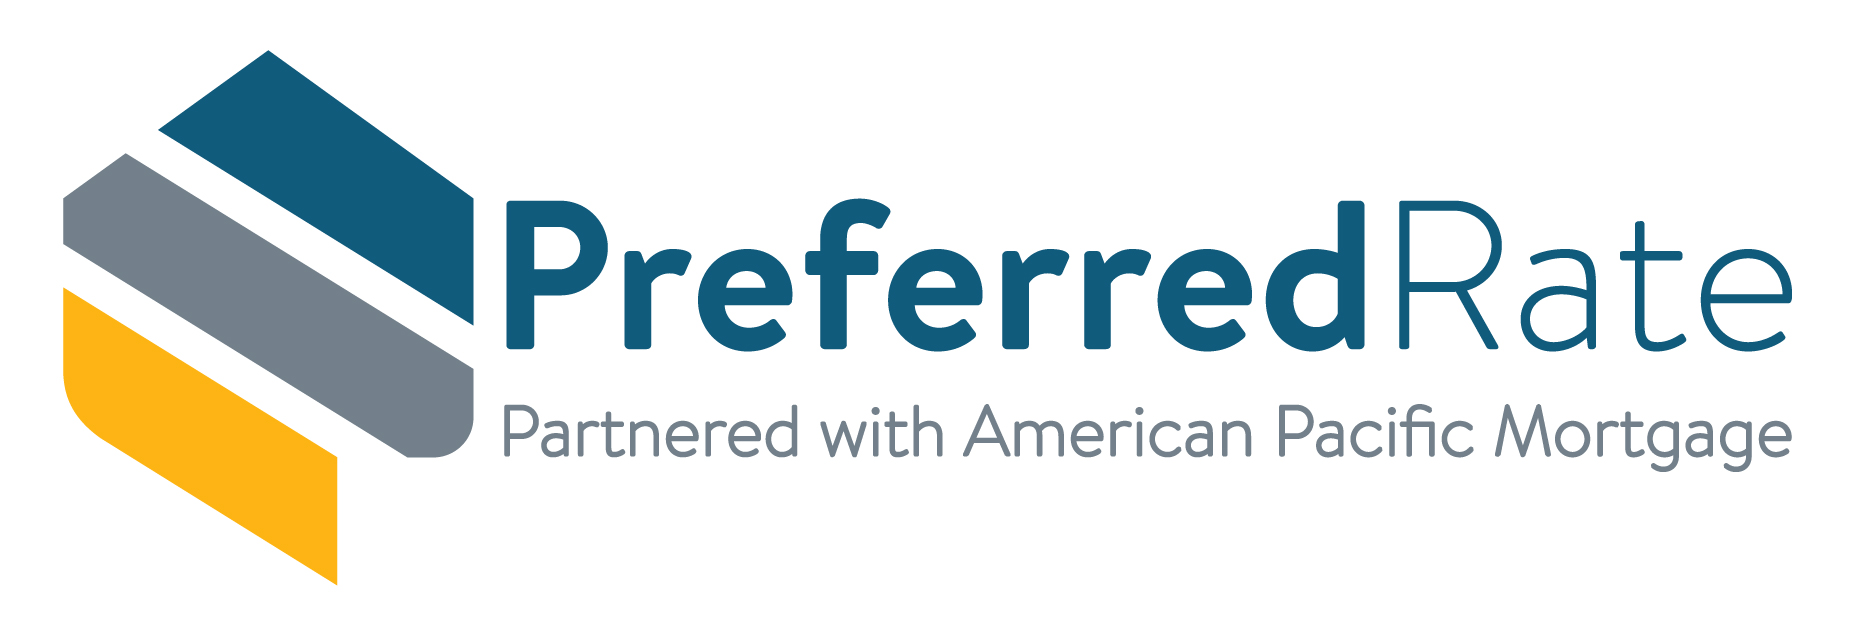 Preferred Rate Partnered with APM